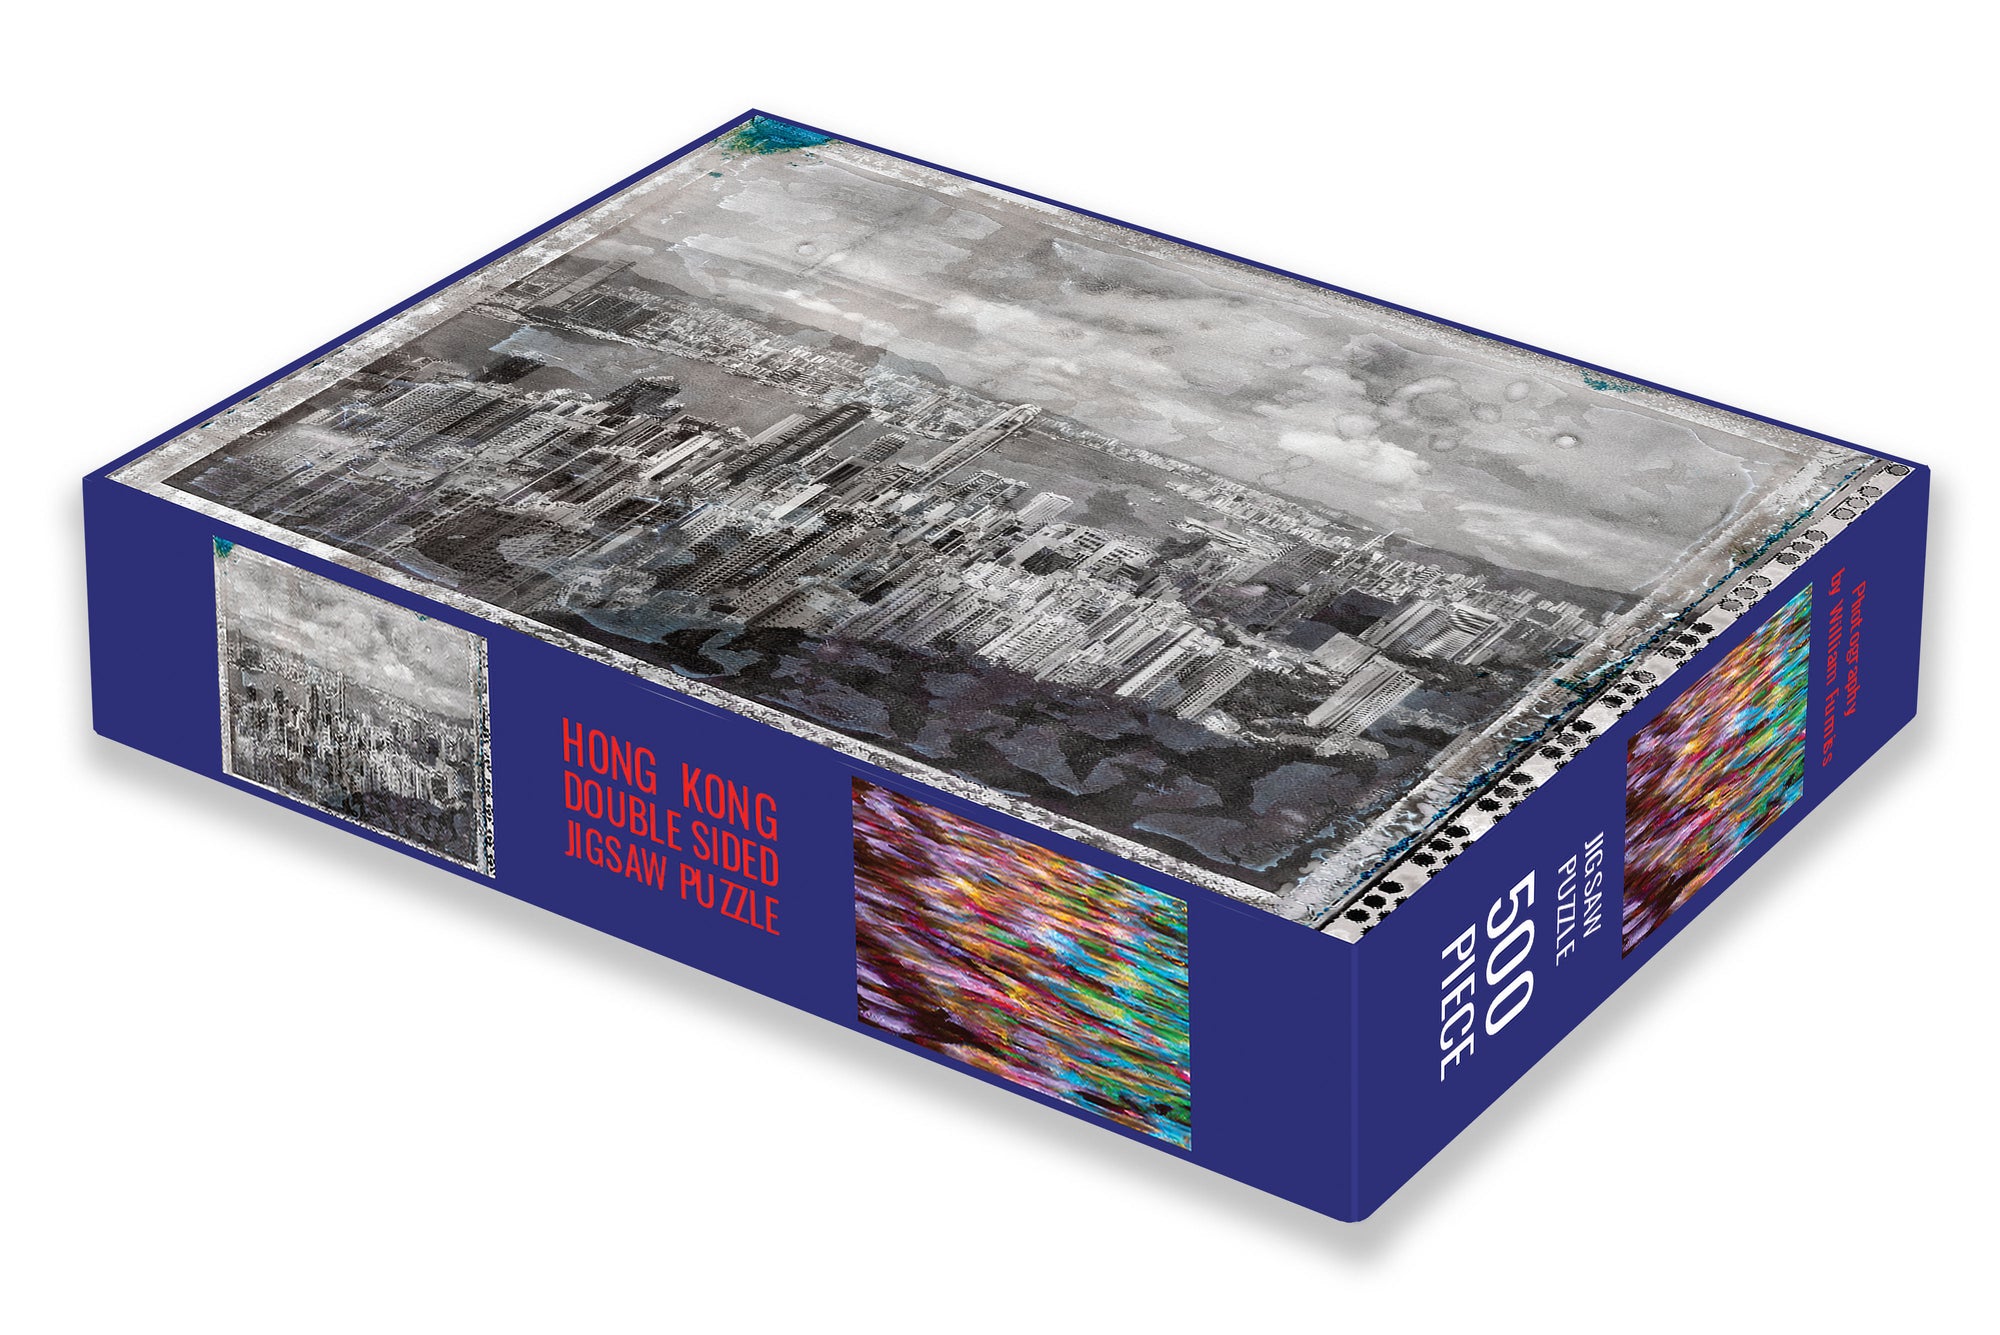 10 Hong Kong Double Sided Puzzles